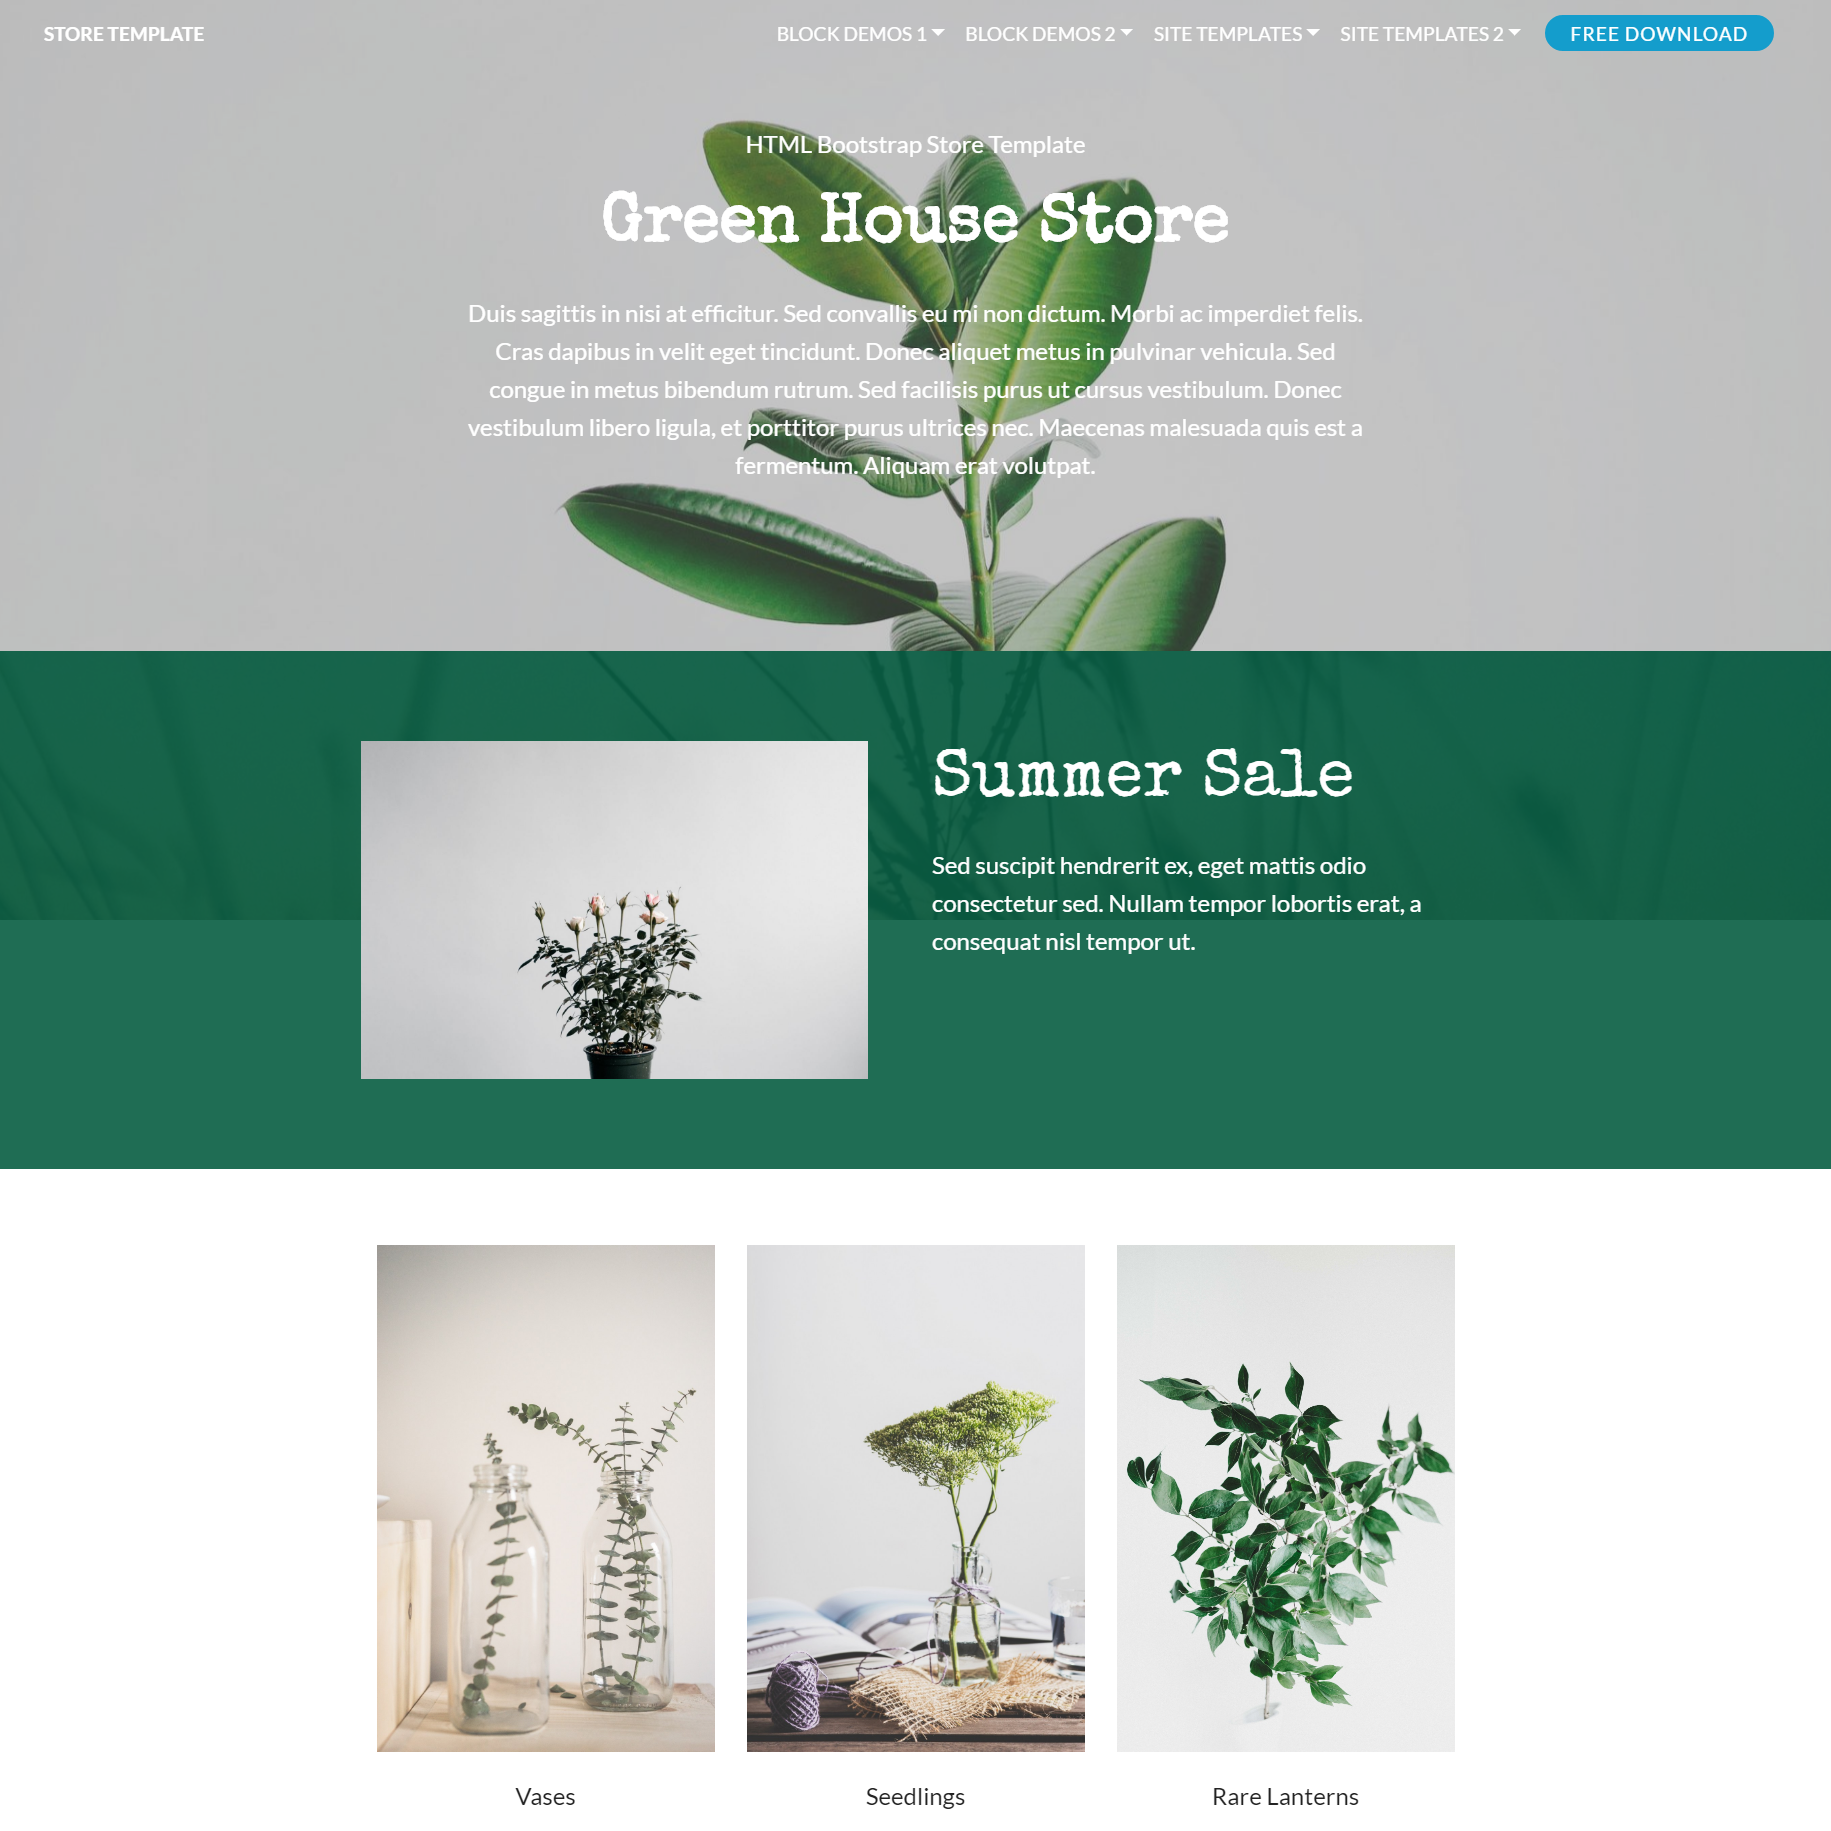 Free Download Bootstrap Store Templates